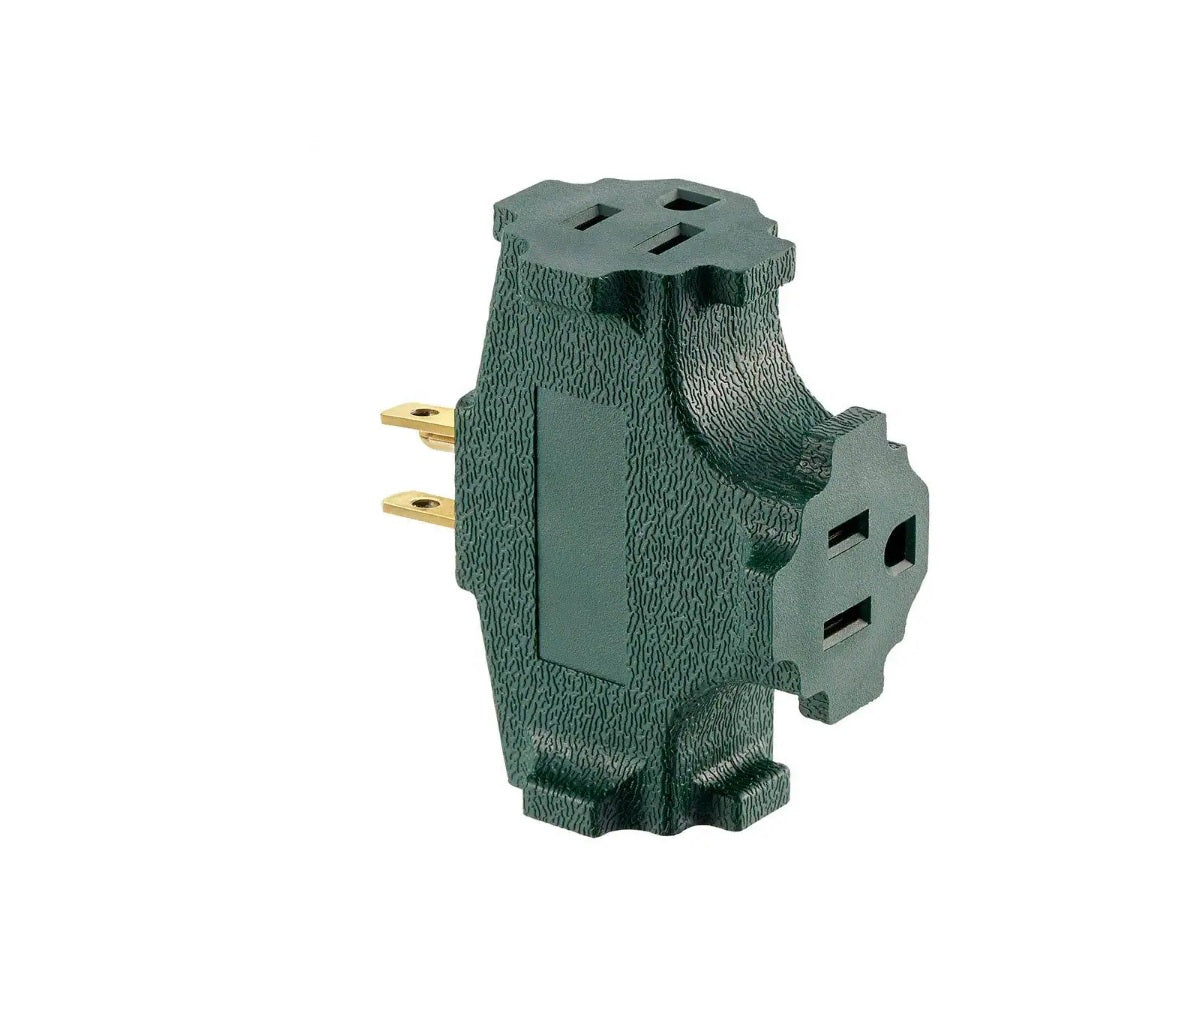 Leviton 00694-0GR Indoor Grounded 3 Outlets Adapter, Green